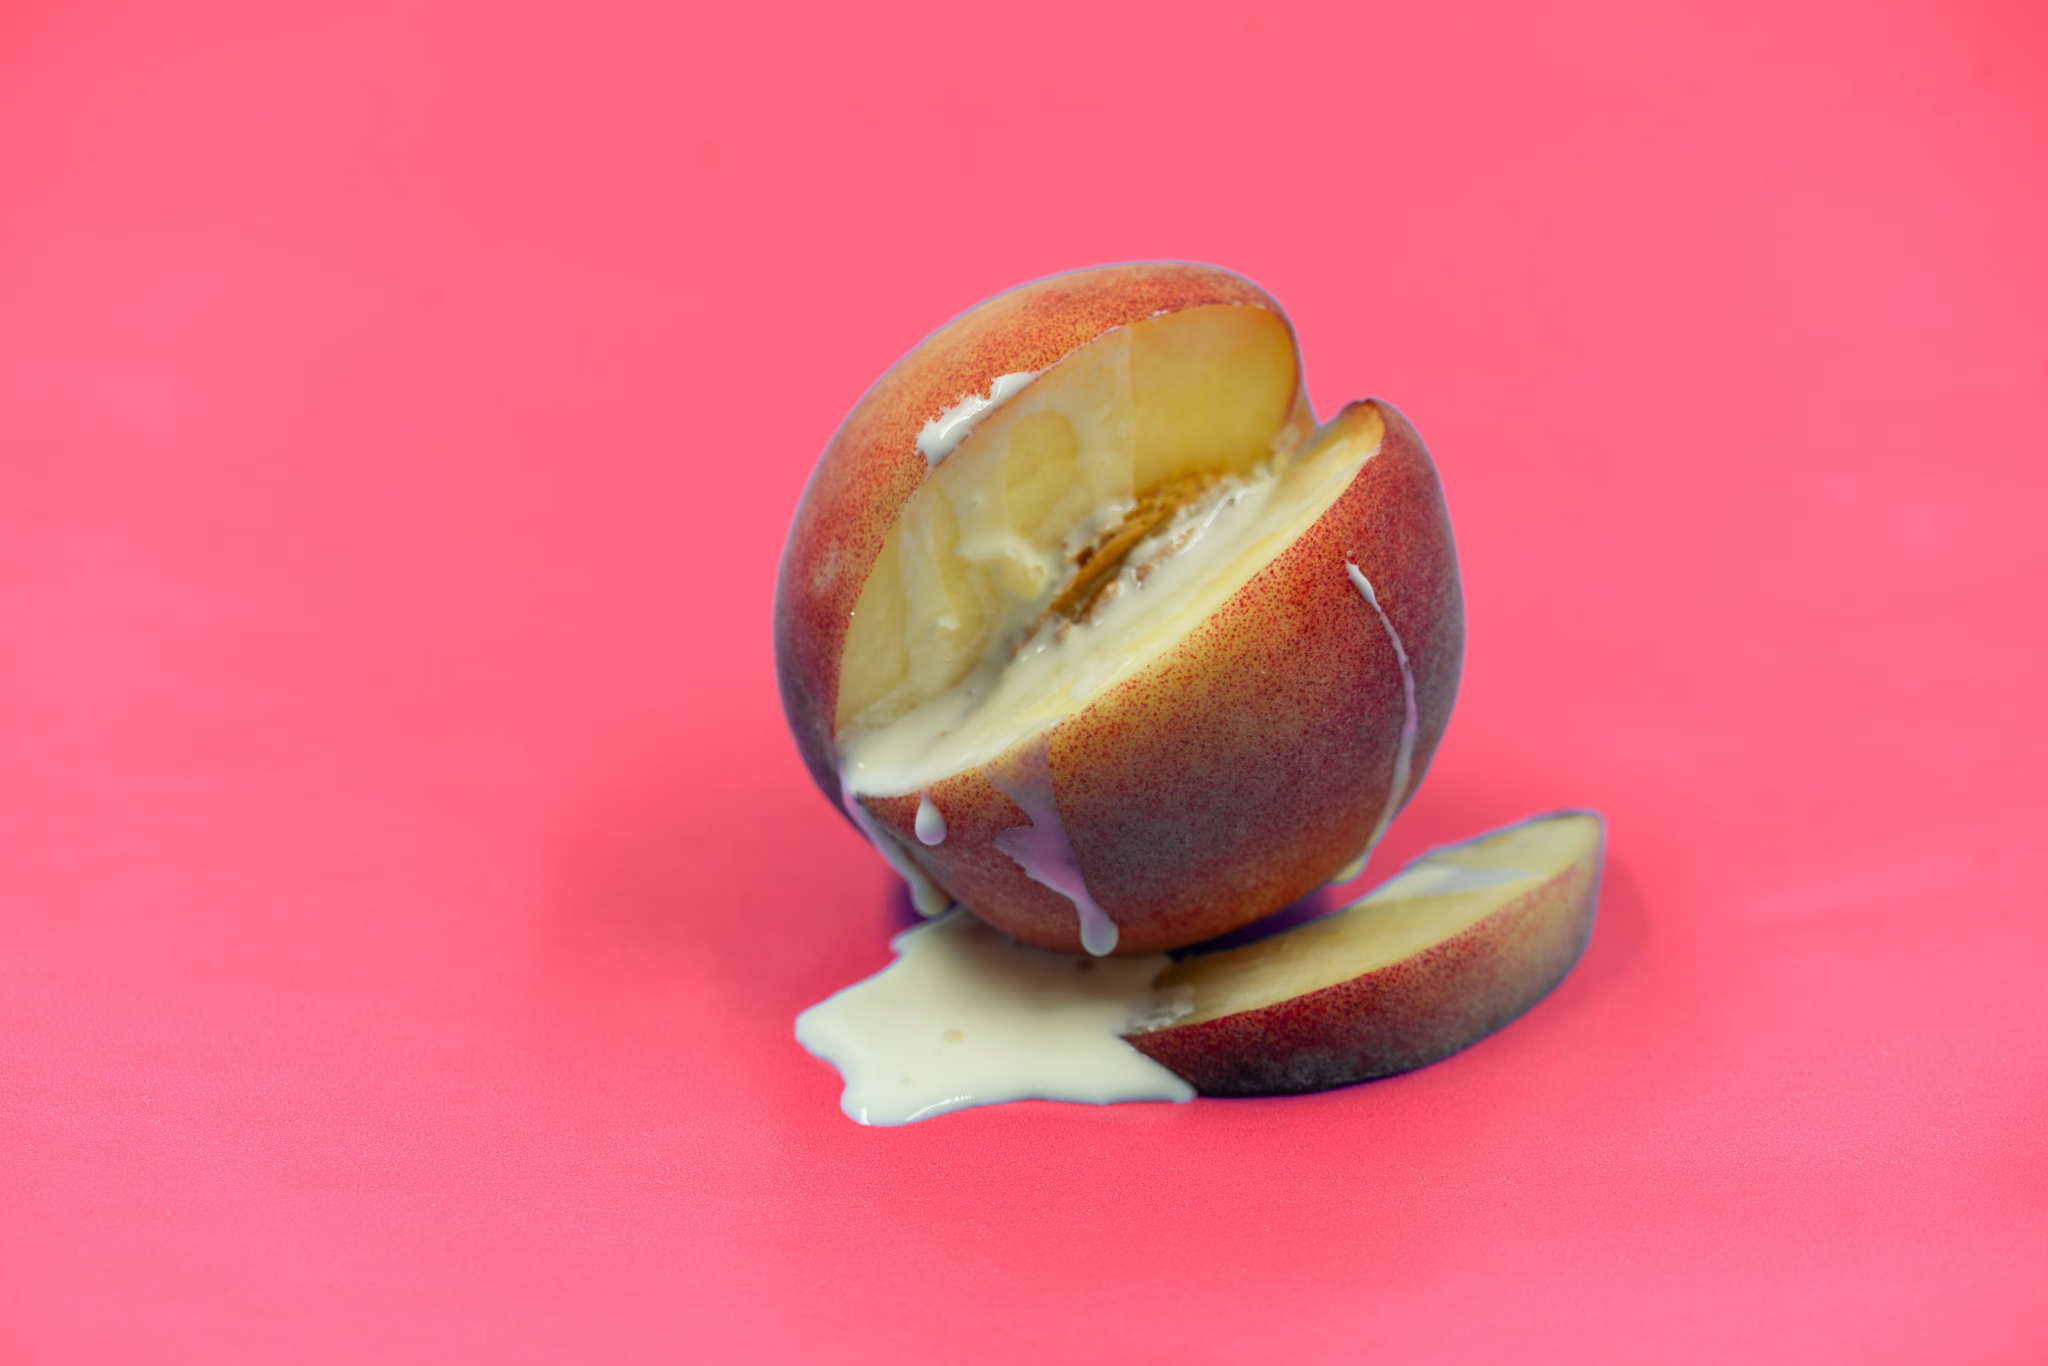 A cut-open peach with milk dripping out